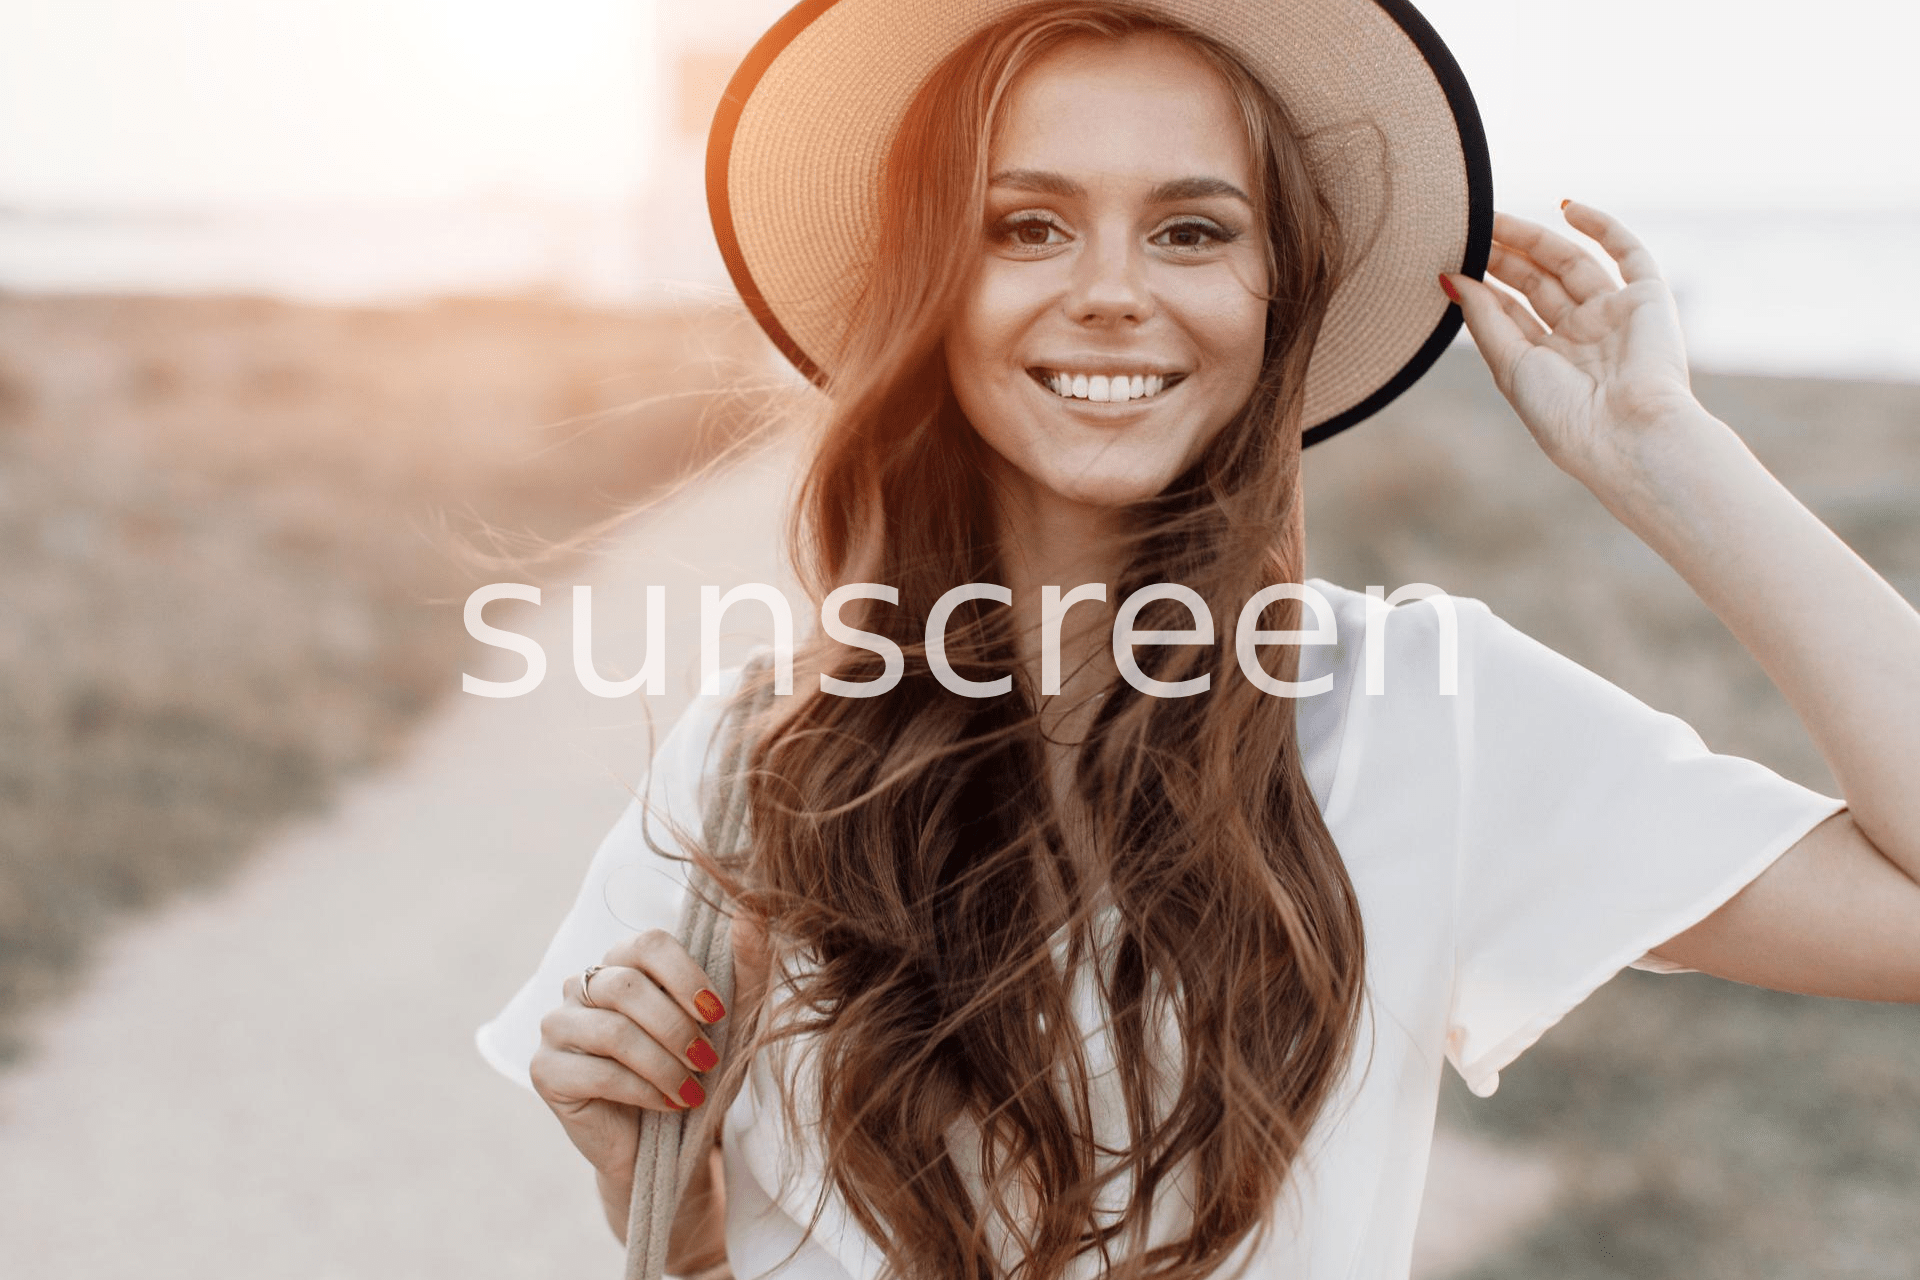 8 sunscreens that will protect your face and body